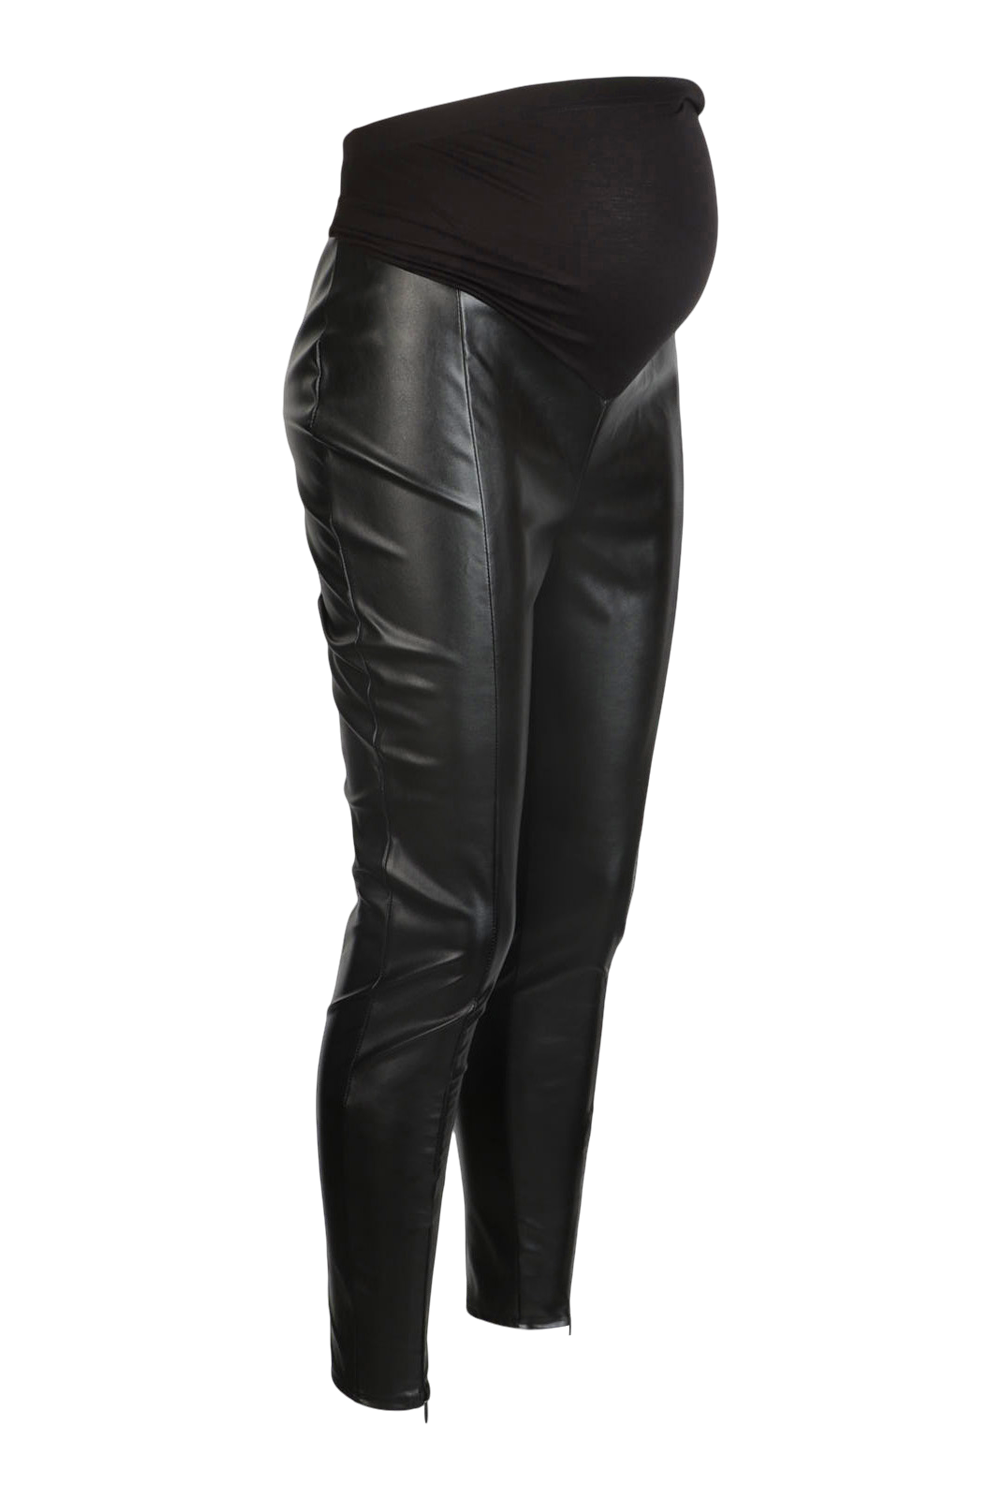 Faux Leather Spanx Leggings Reviews  International Society of Precision  Agriculture